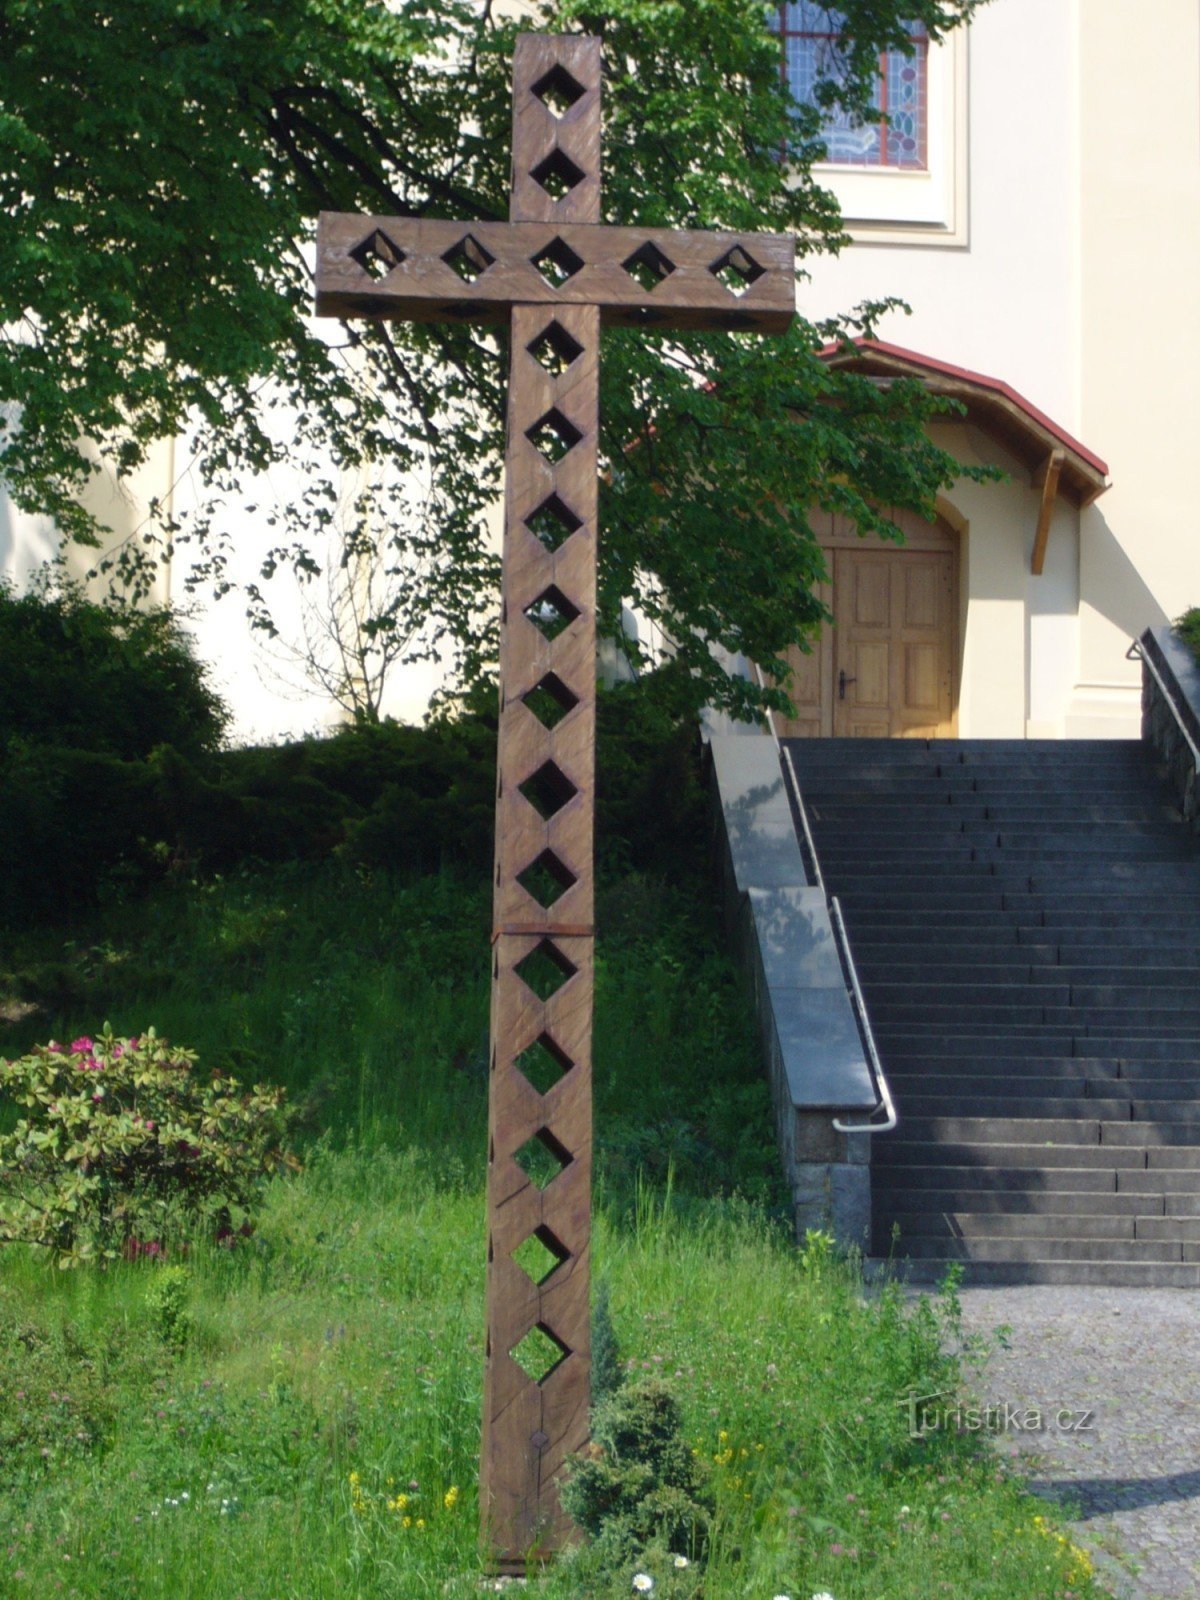 Plesná - cross in front of the church of St. Jakub